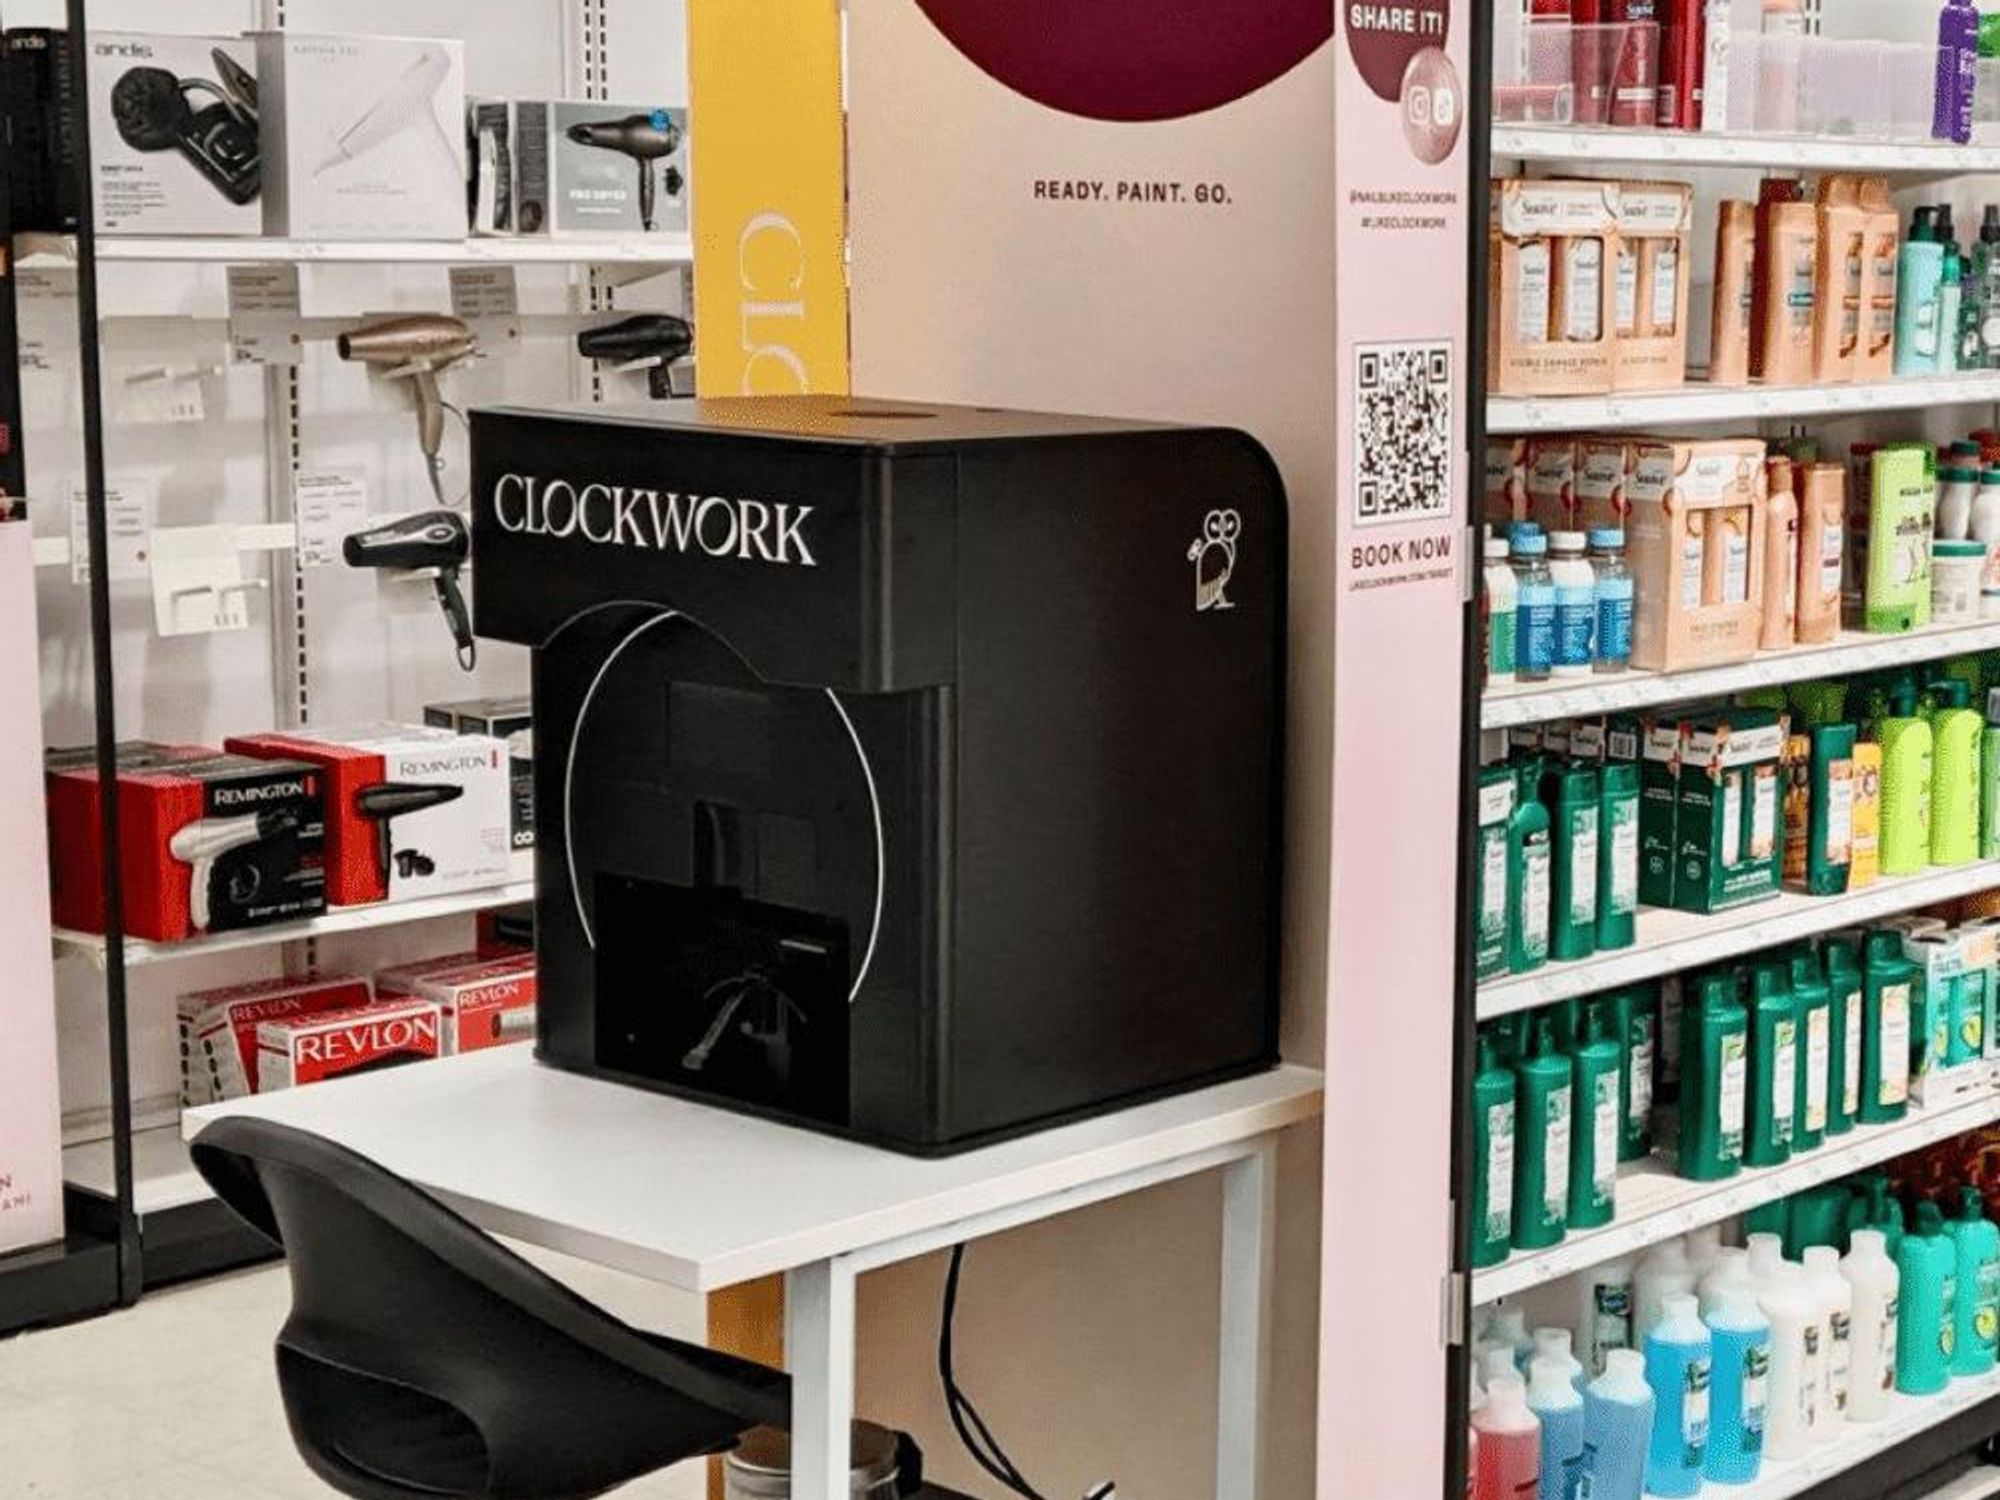 Nail-painting robot at two Bay Area Target stores: Here's what it's like